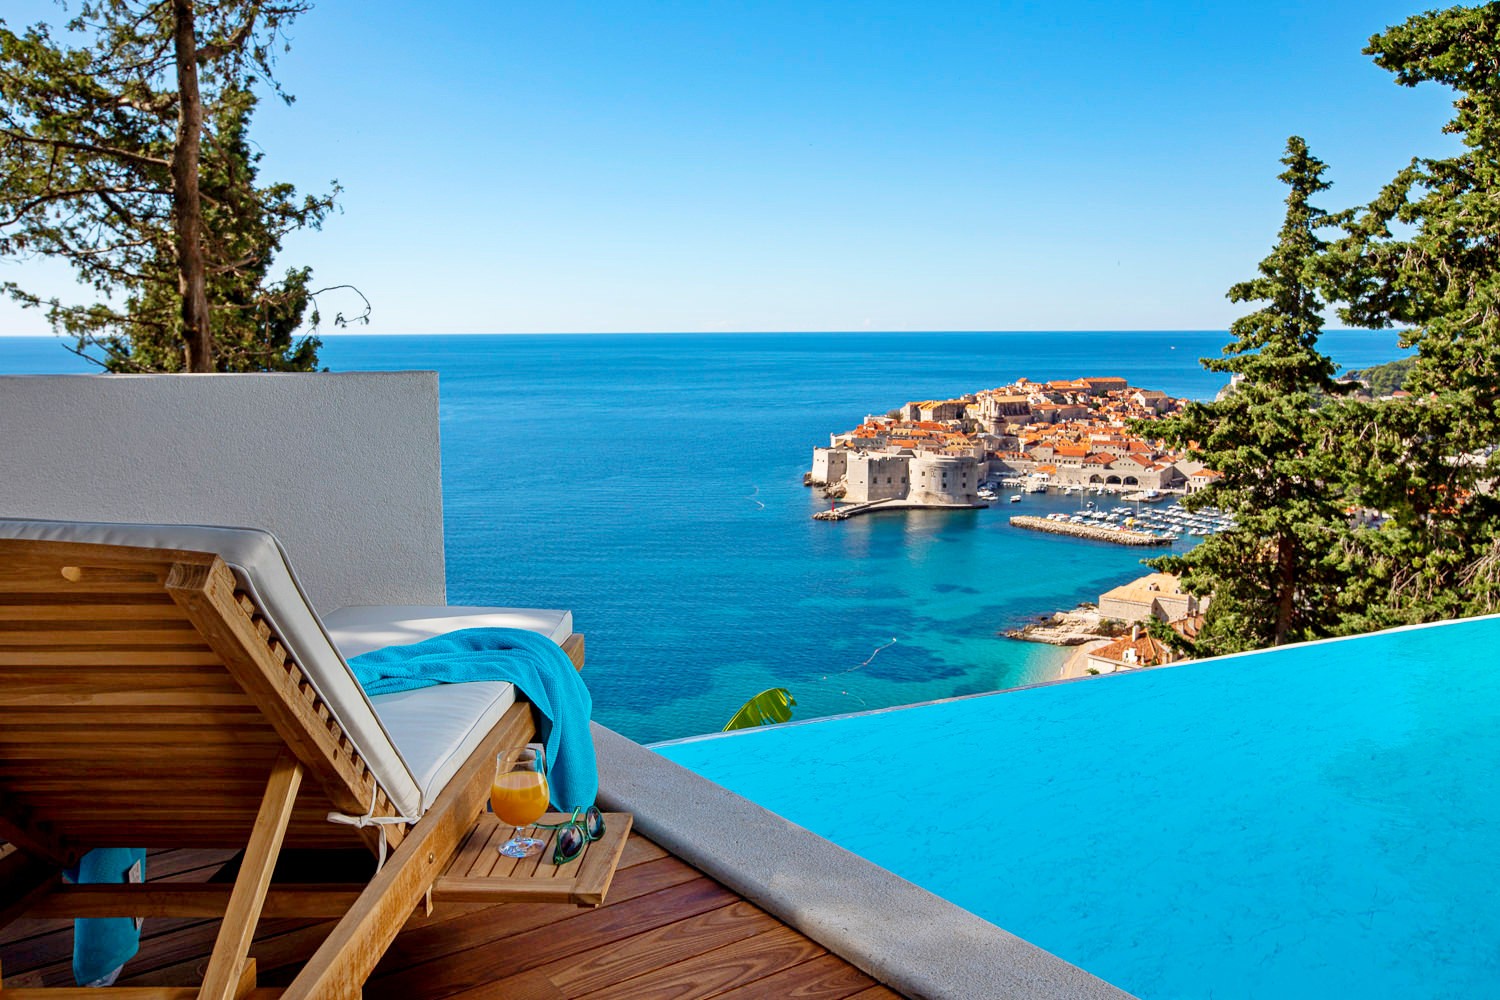 Villas in Croatia – Frequently Asked Questions